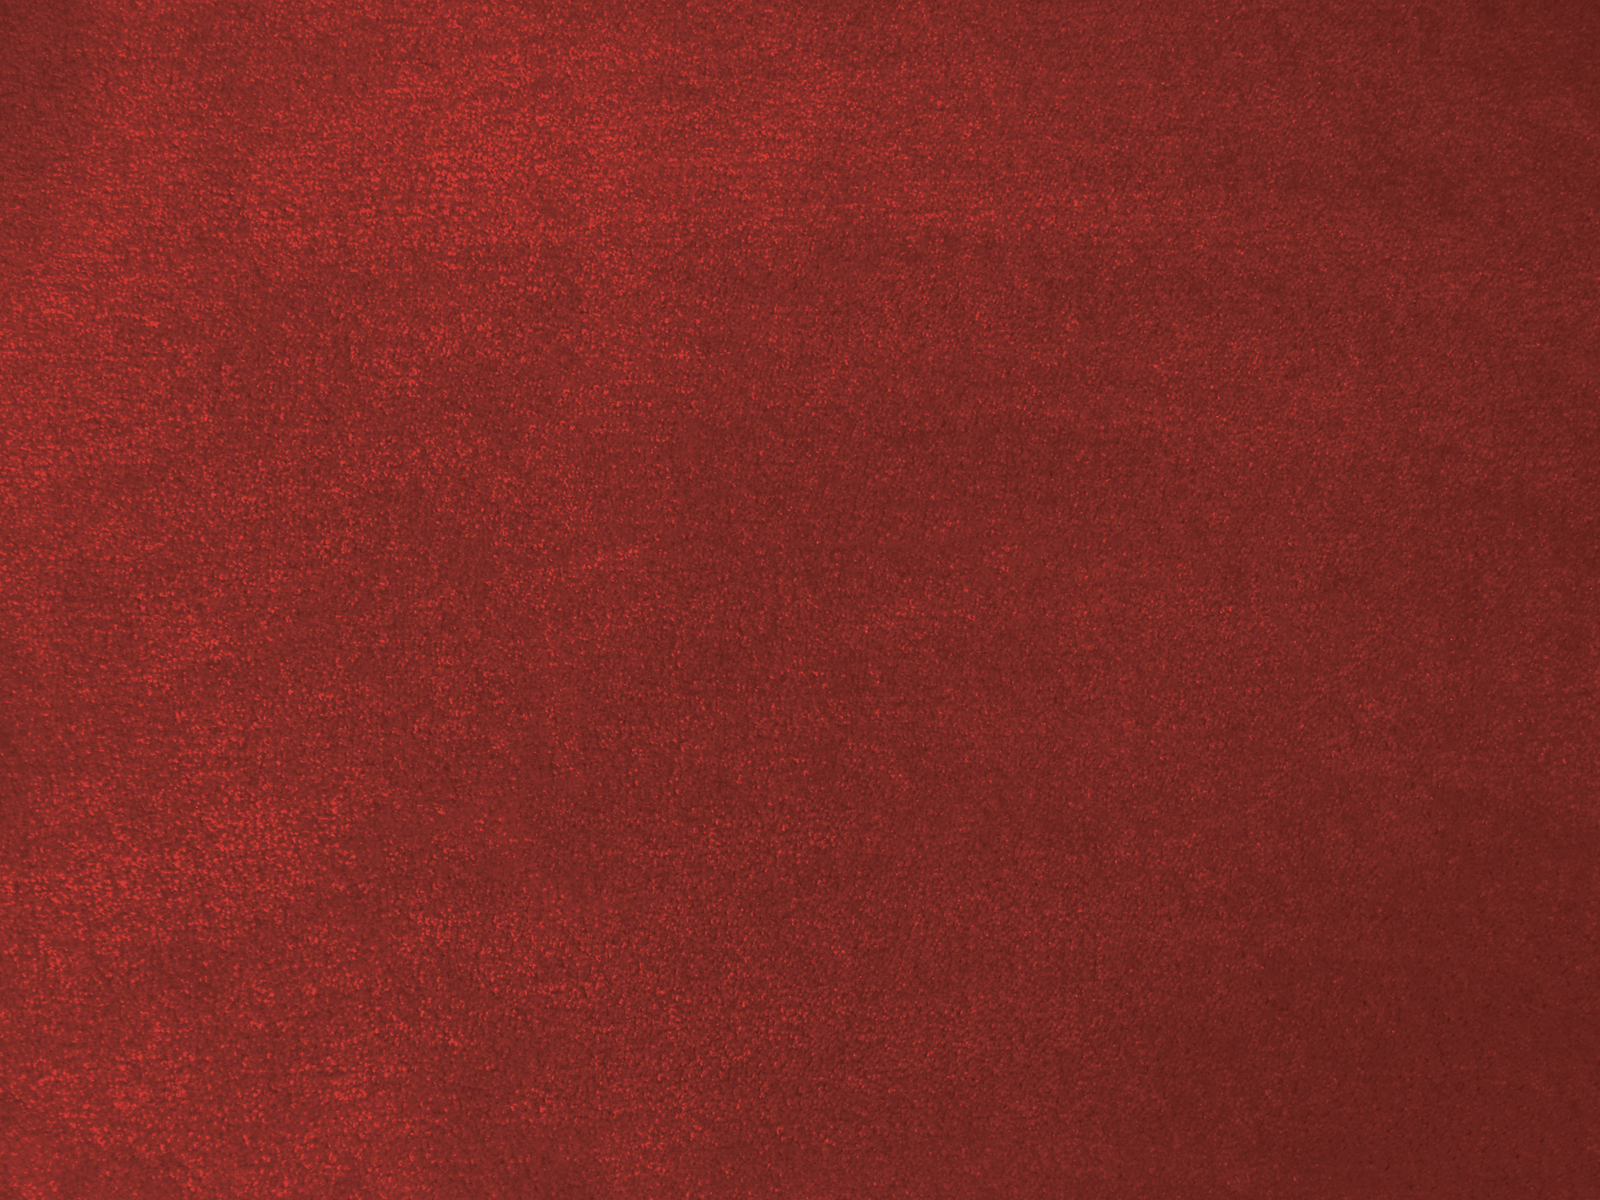 10' Advantage 16 Trade Show and Event Carpeting | Red